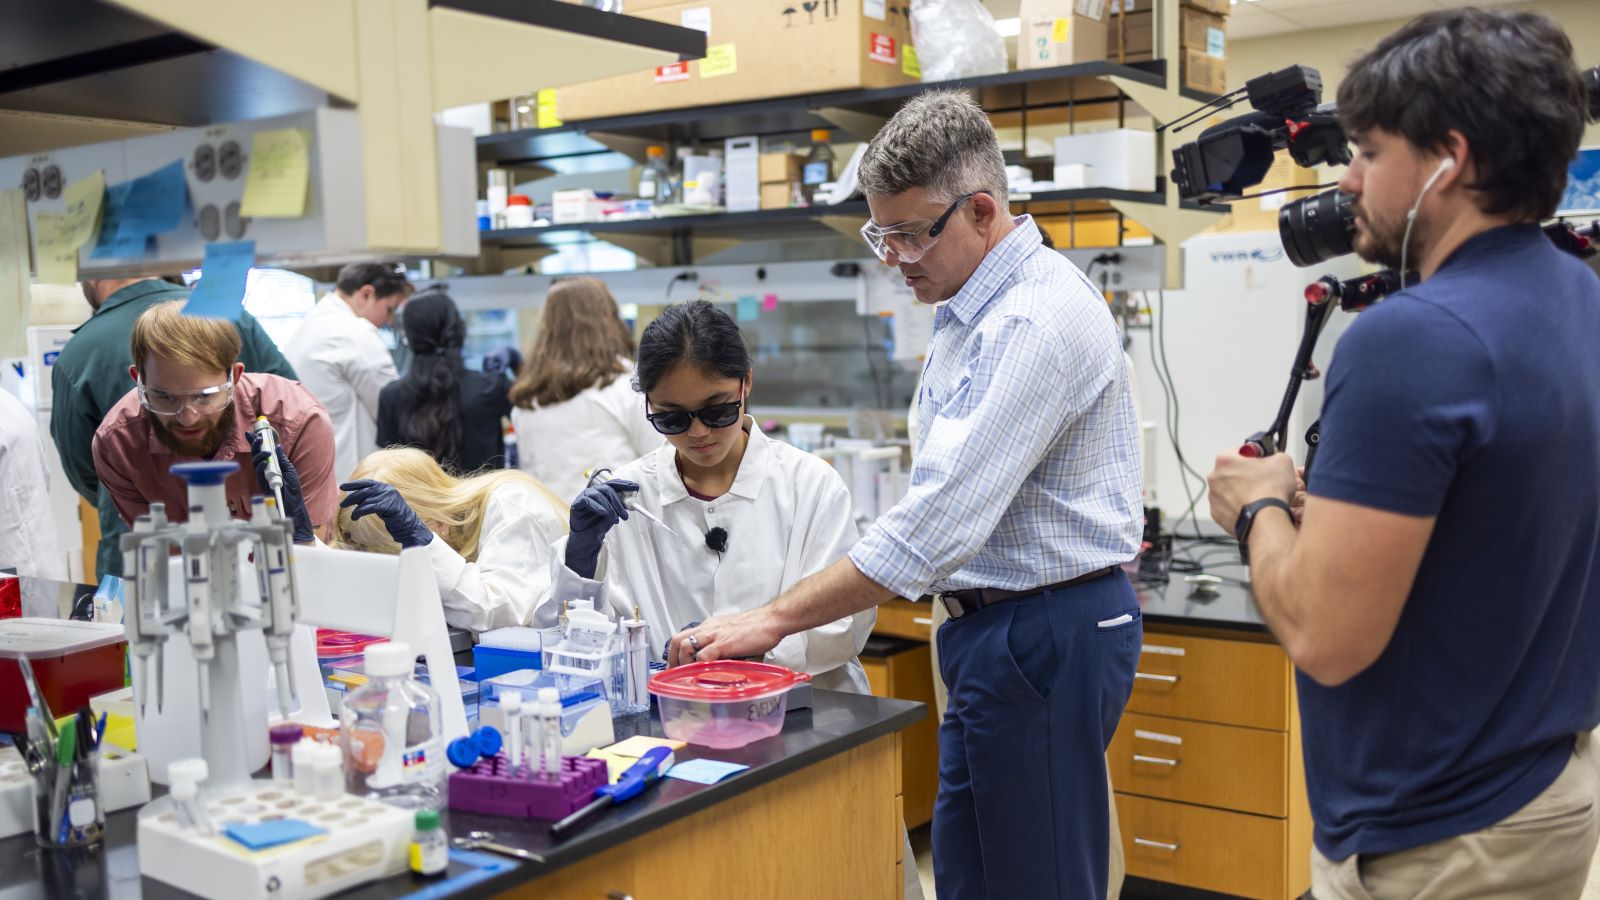 Baylor chemist Bryan Shaw works with students who have blindness or low vision to participate fully in a chemistry lab